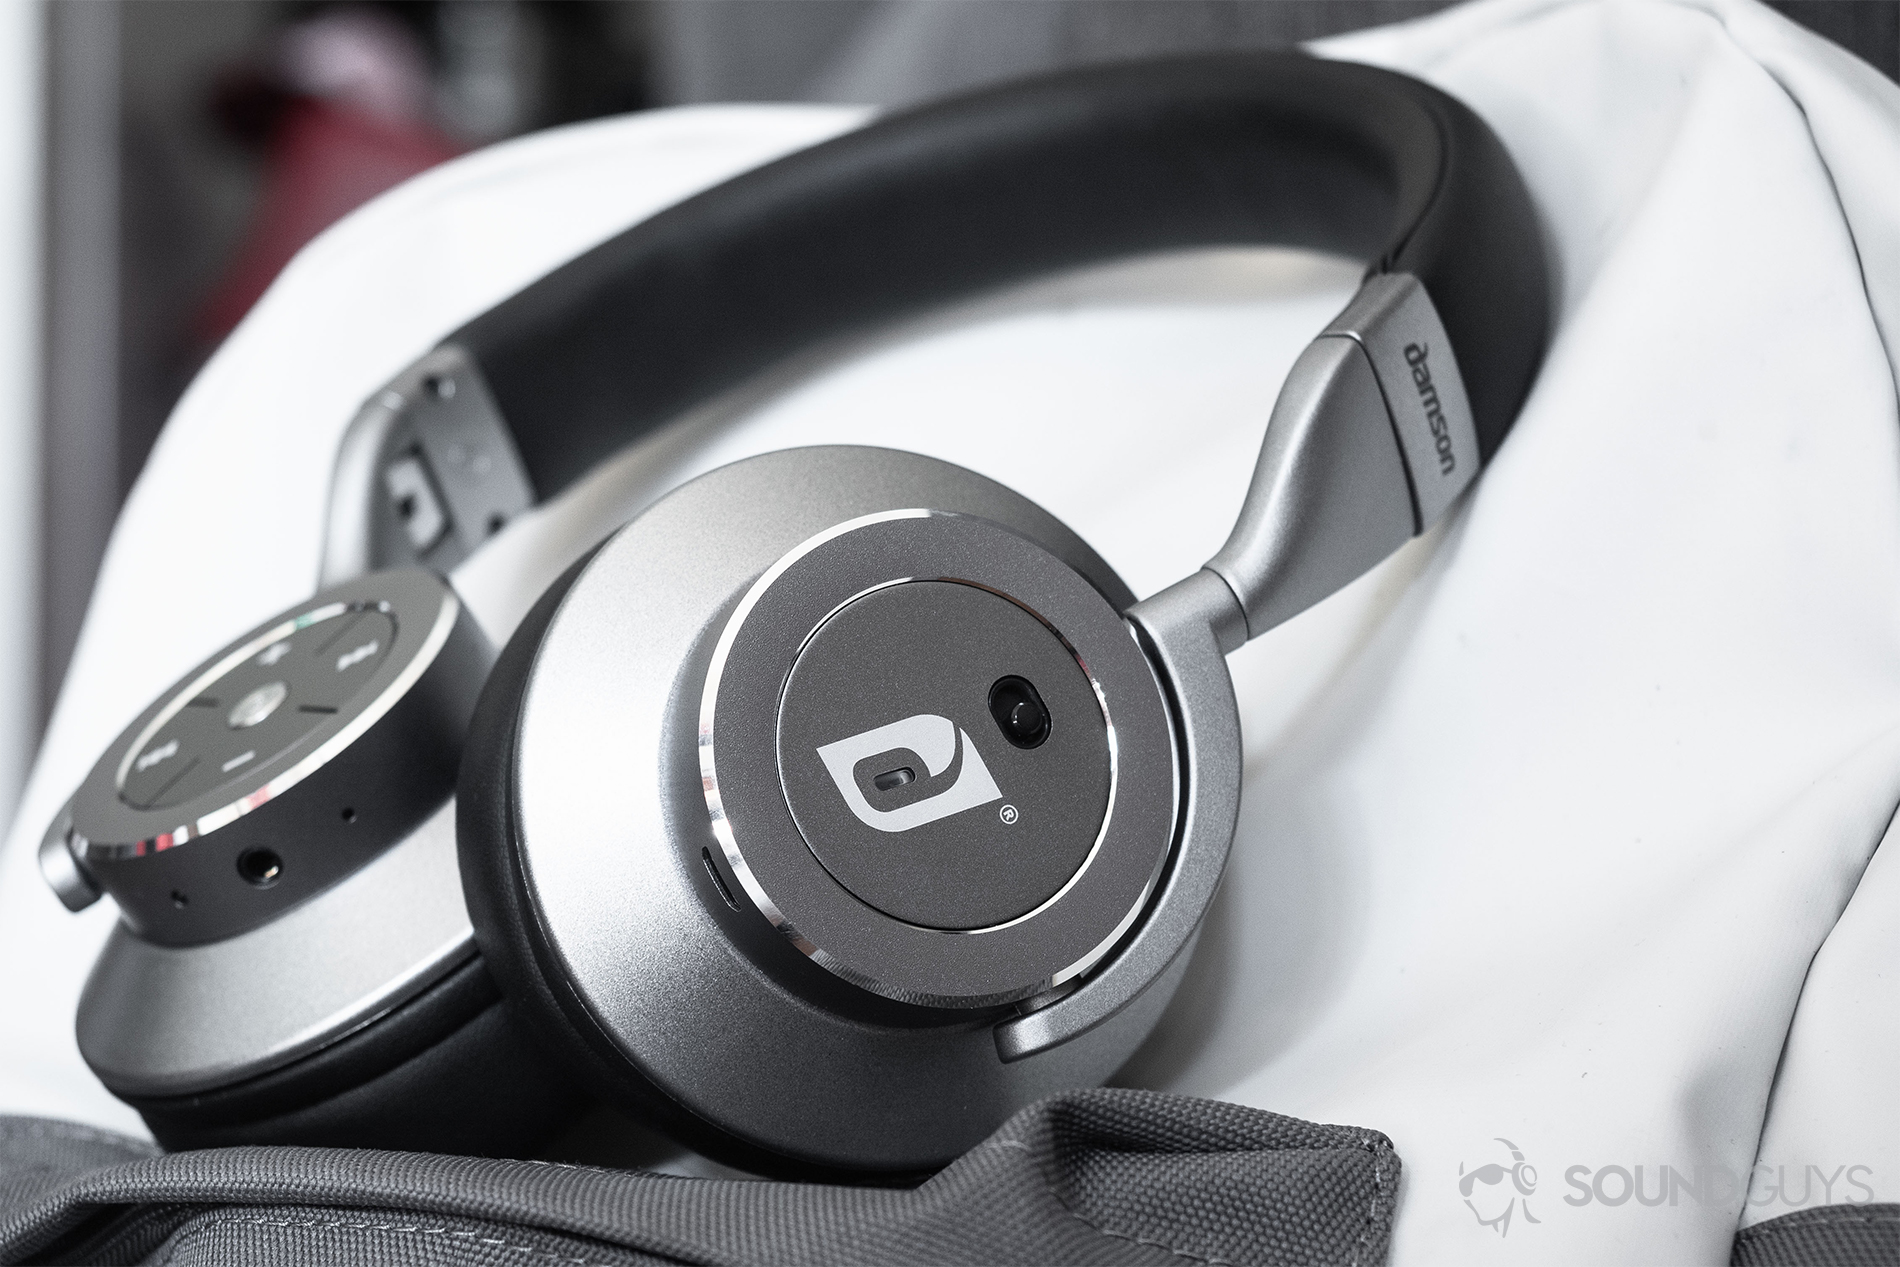 Damson HeadSpace Active Noise-Canceling review: The headphones on a white and gray backpack. The active noise-canceling toggle is facing the viewer.